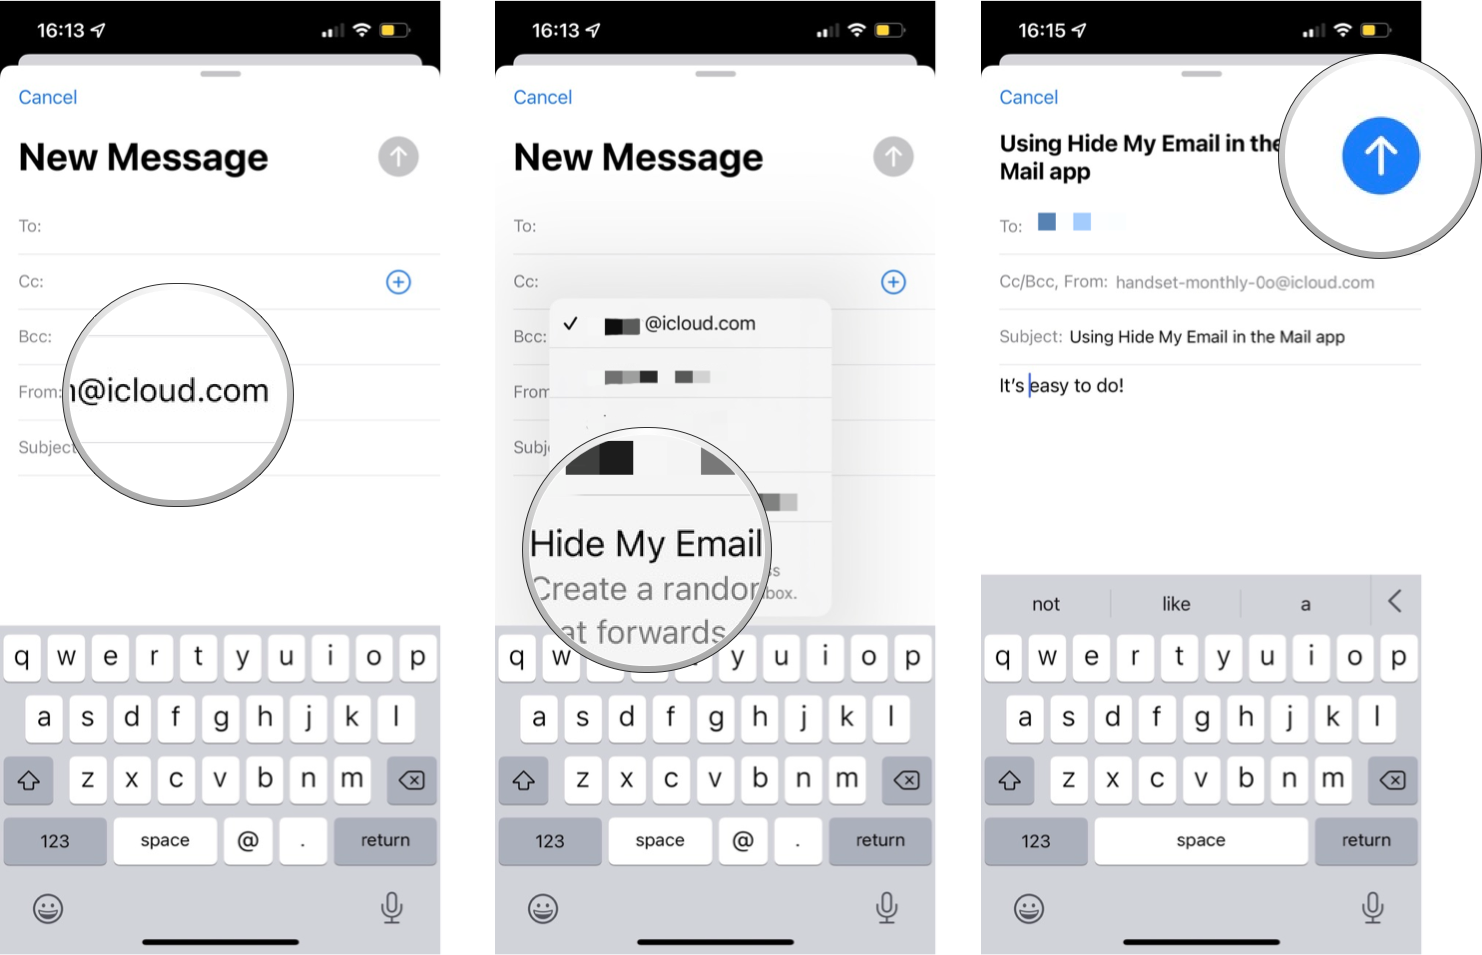 How to use Hide My Email in the Mail app: Tap your email address, tap Hide My Email, type out your email as normal. Hide My Email will generate a random email address when you enter a recipient. Tap Send when you're ready